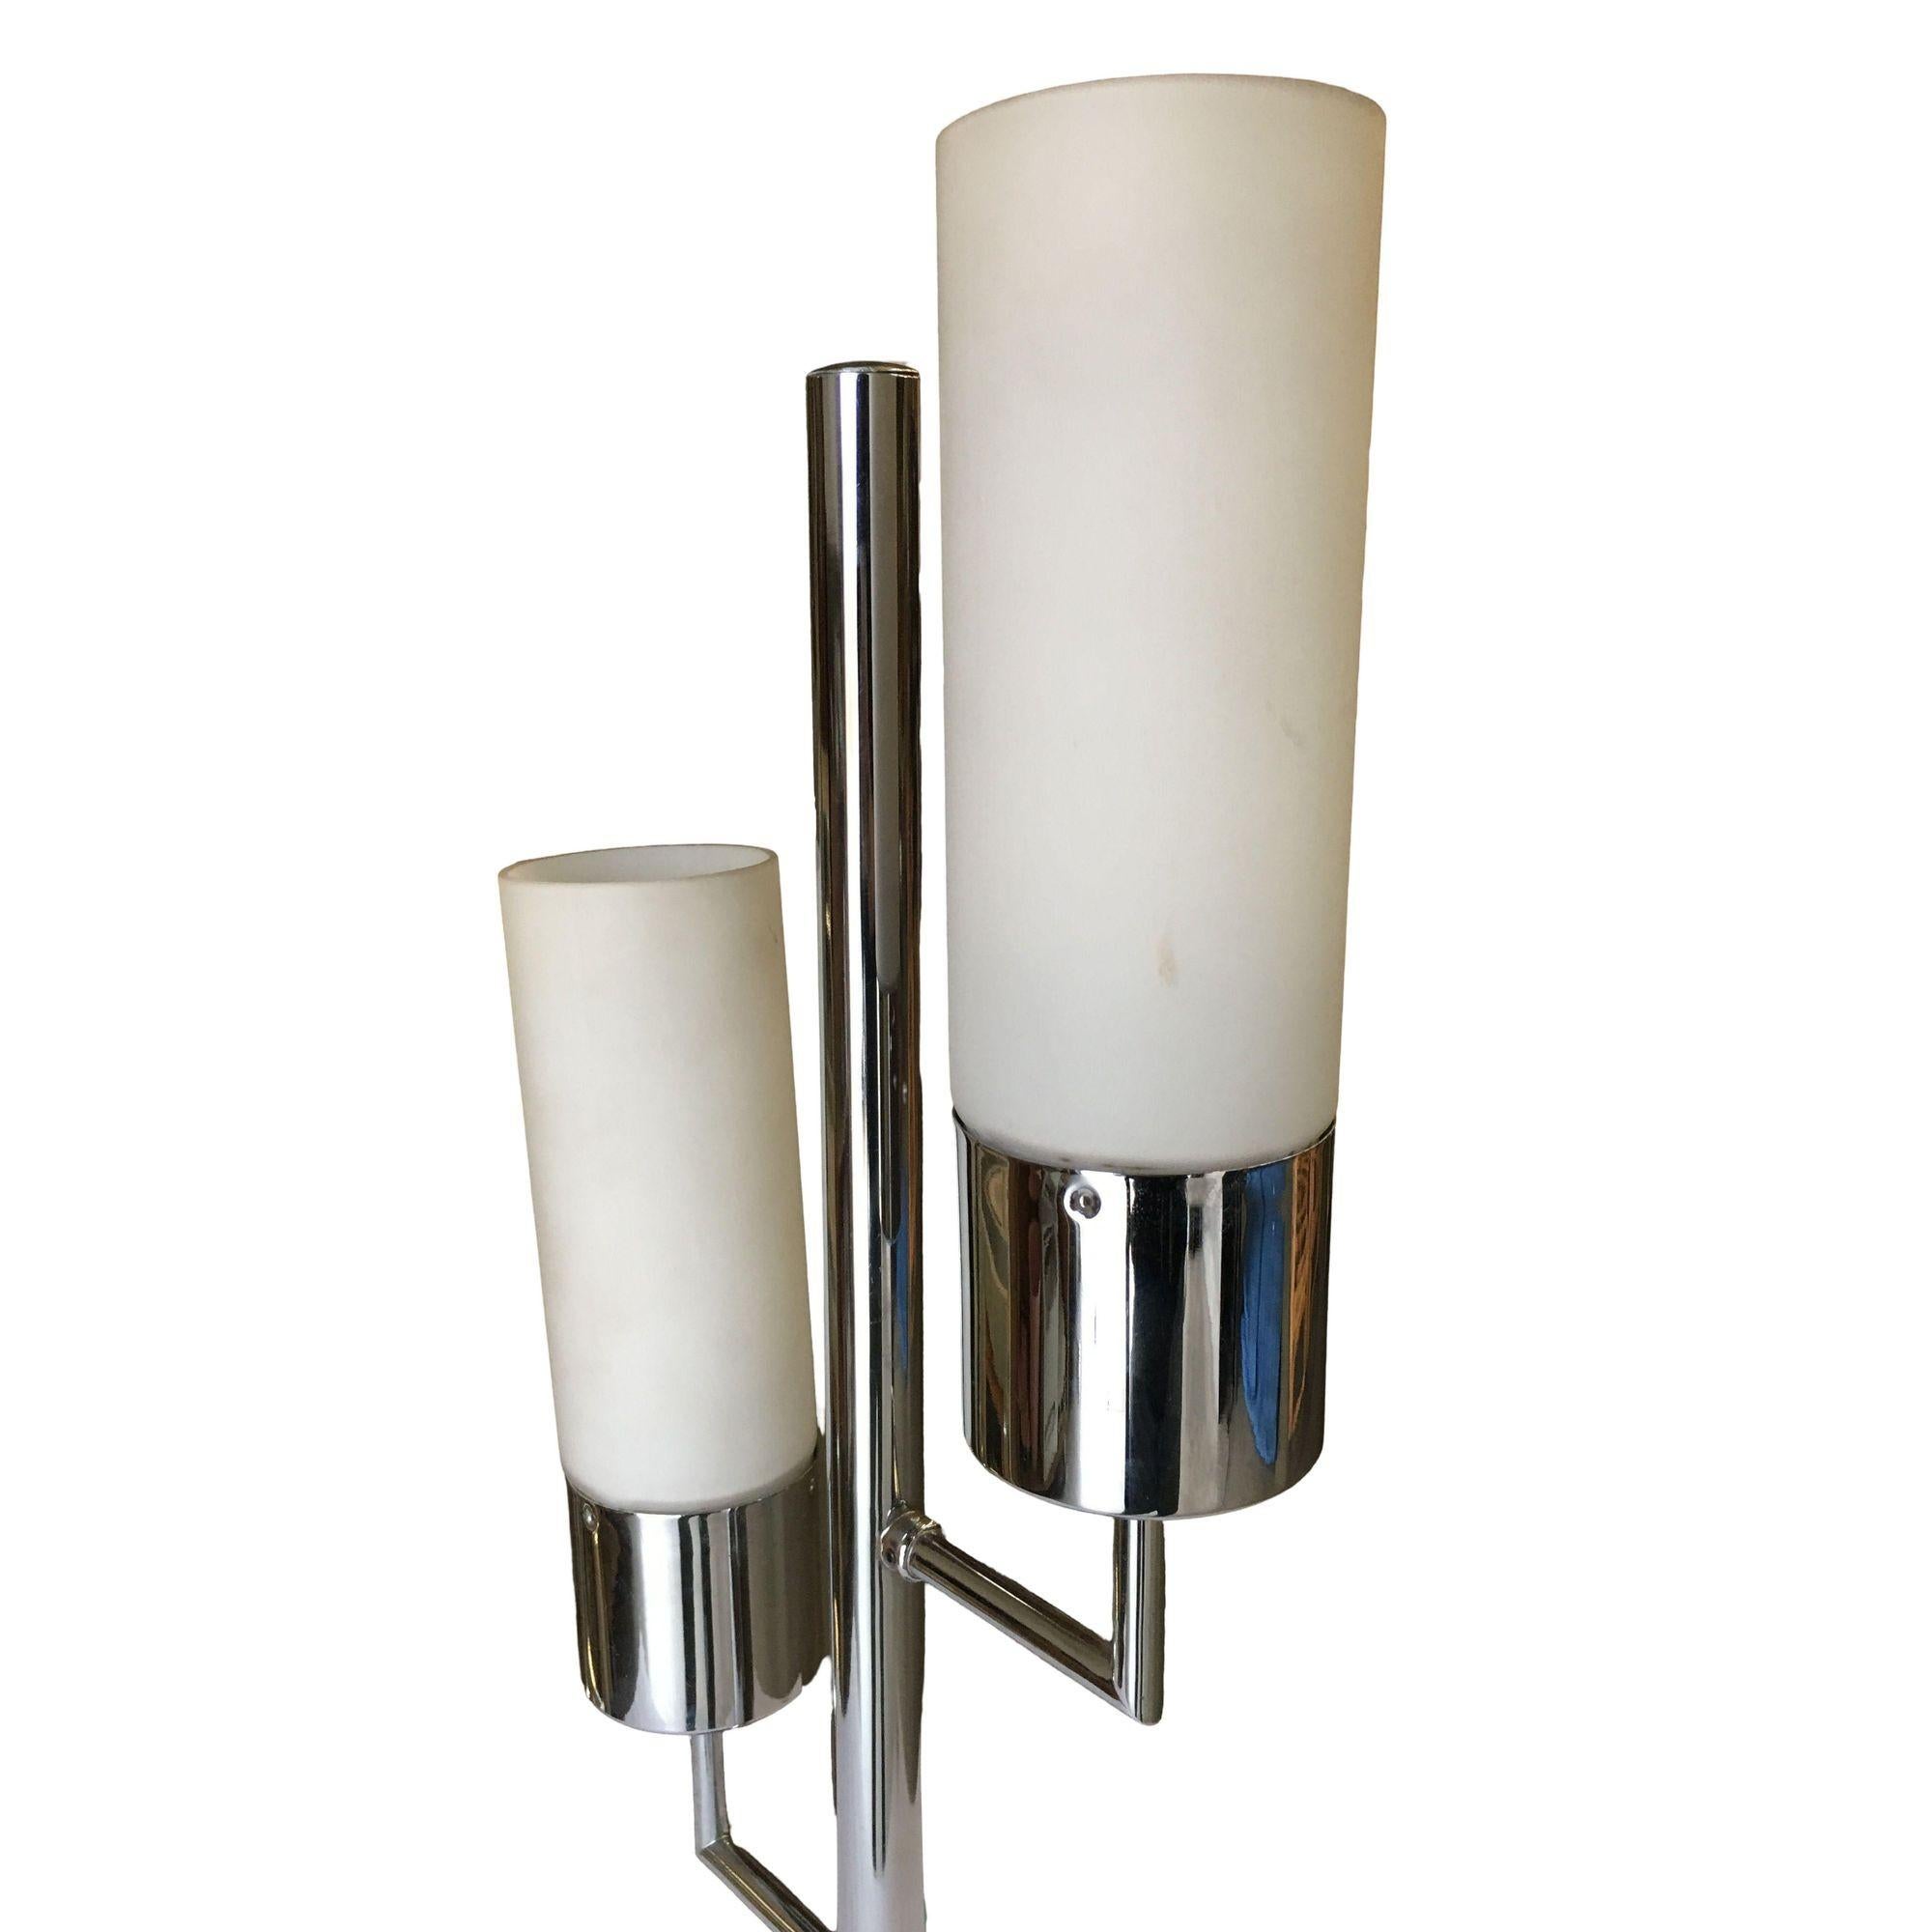 Modernist Twin Cylinder Chrome Table Lamp In Excellent Condition For Sale In Van Nuys, CA